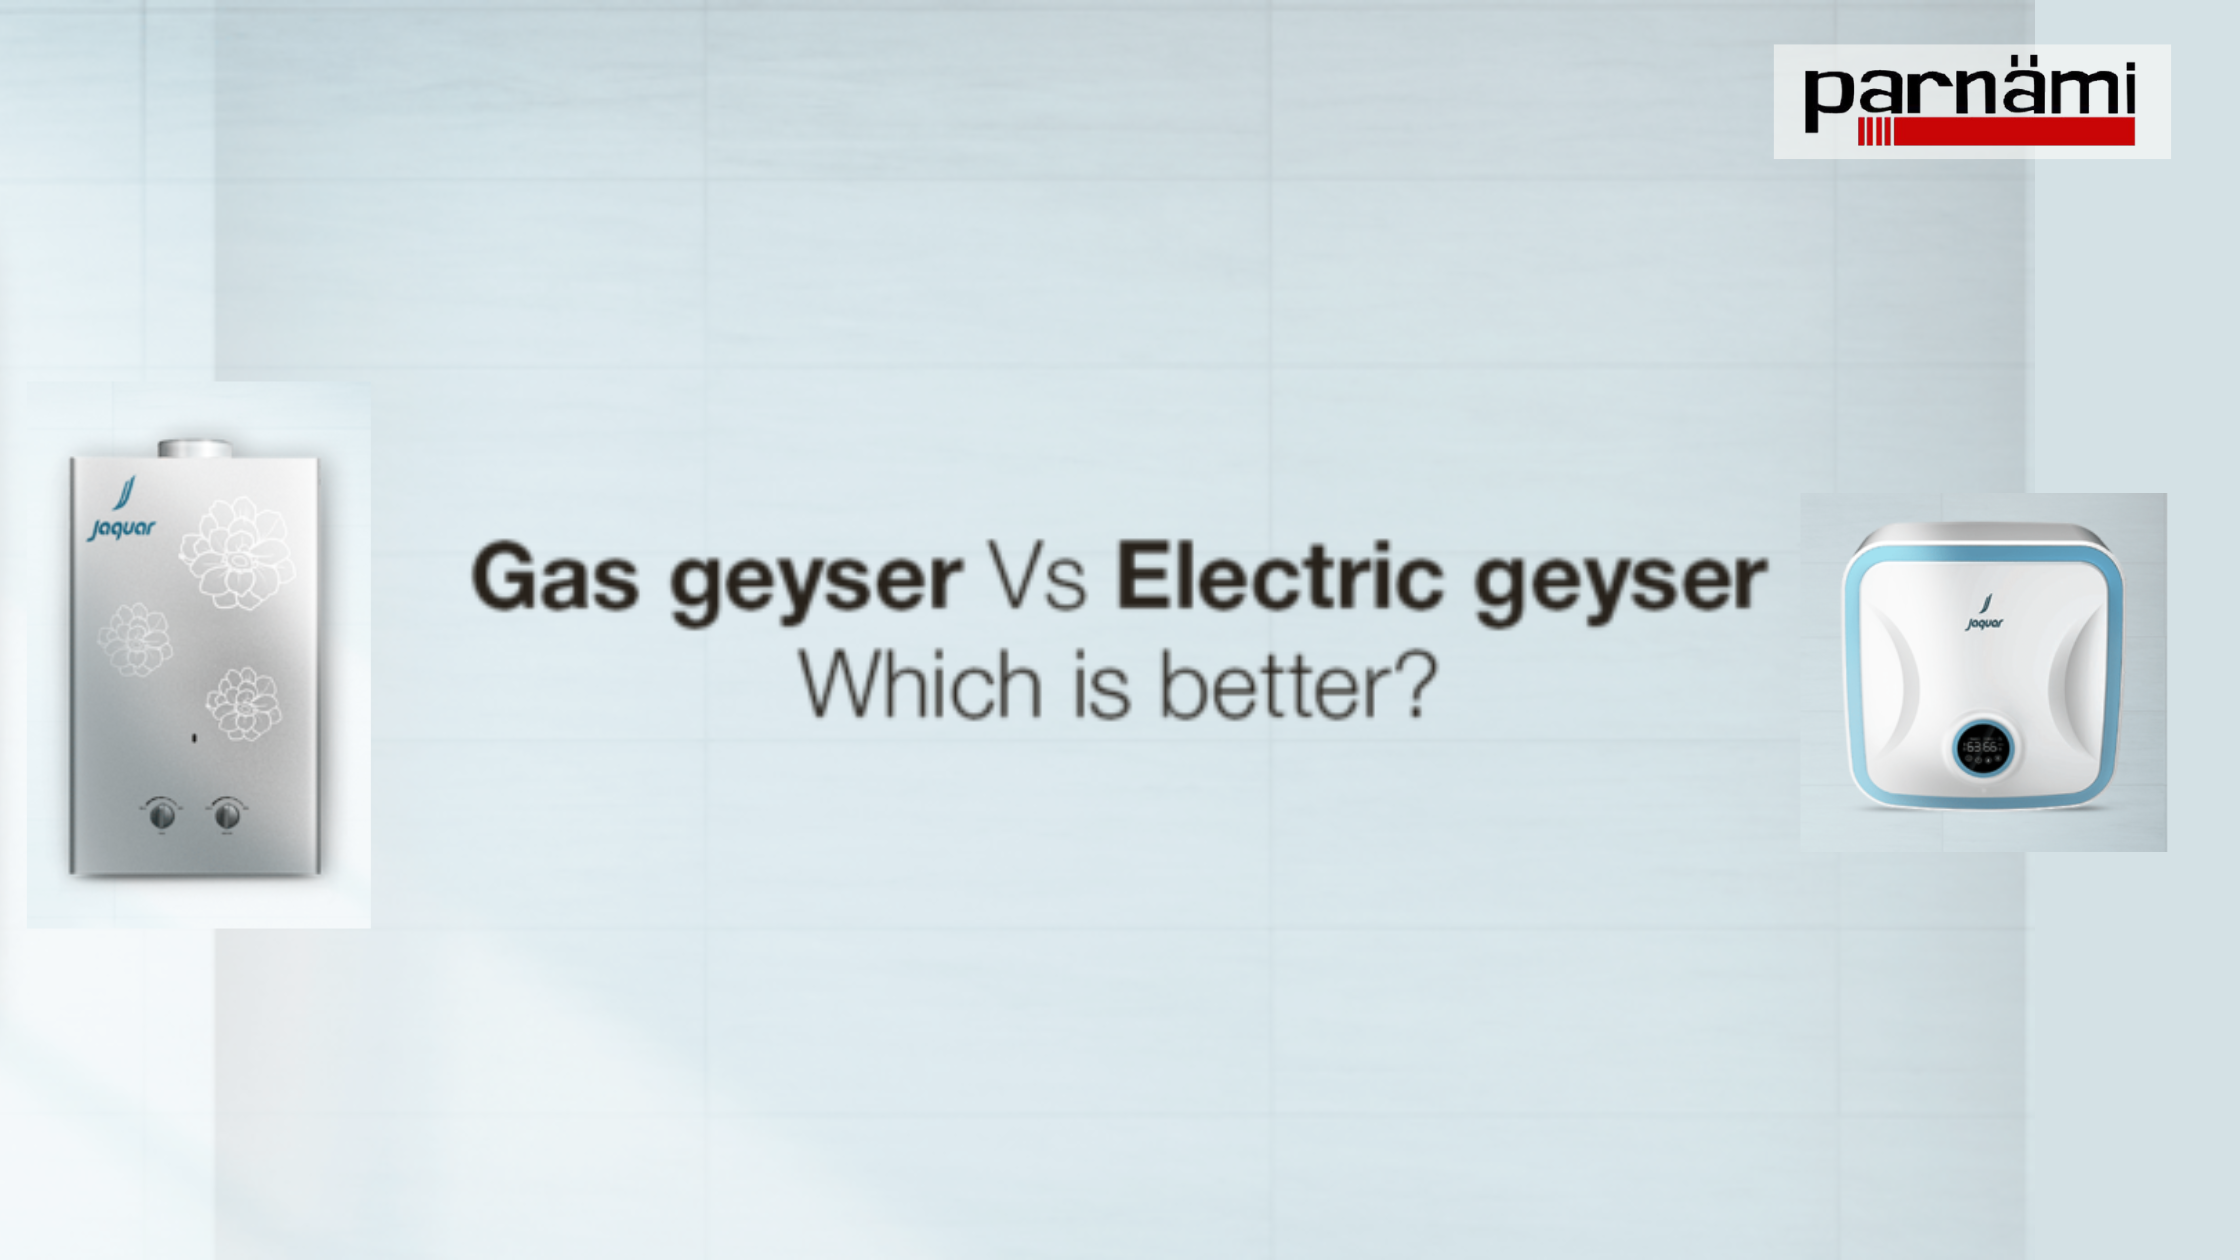 Gas geysers vs Electric geysers: Which is better?